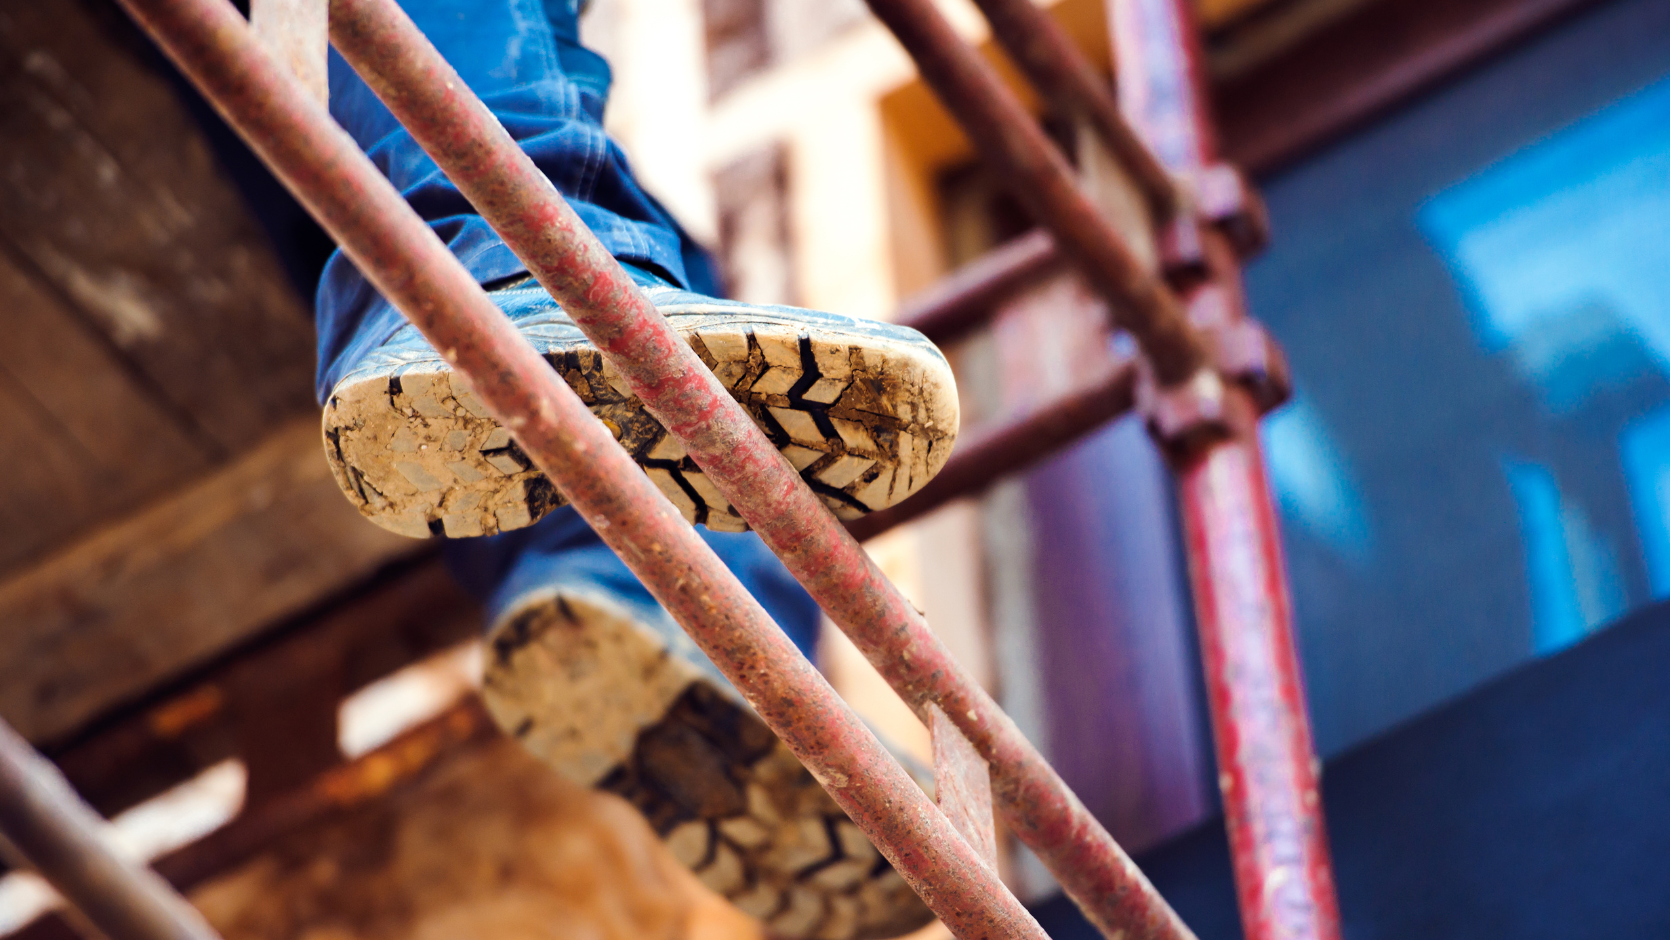 Was the principal contractor liable after a carpenter fell from scaffolding on a construction site? Which case won?